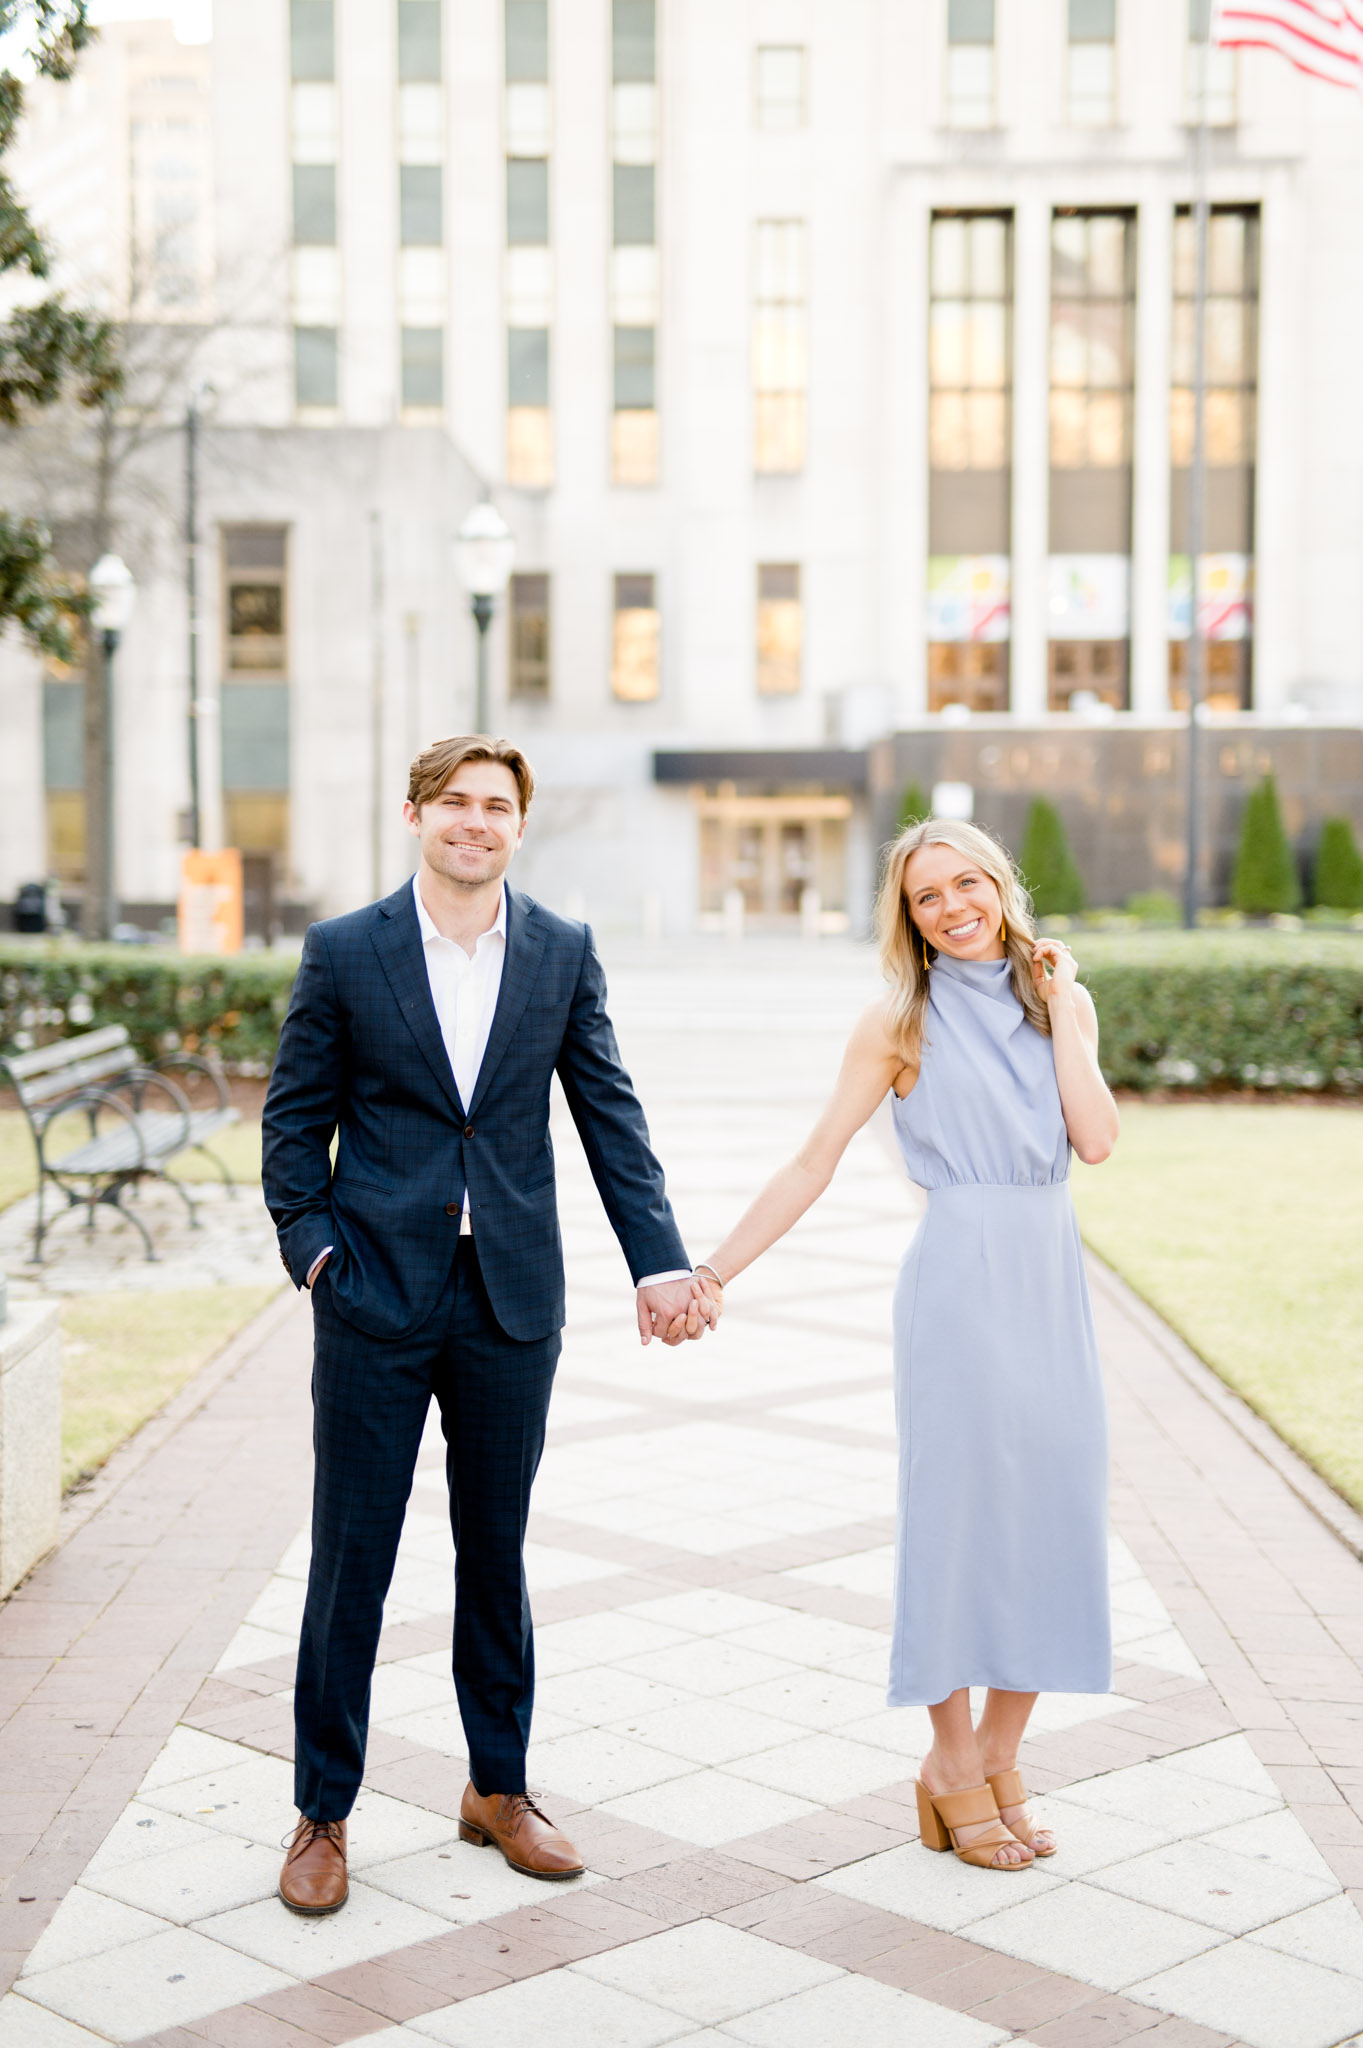 Couple stands in downtown and smiles at camera.